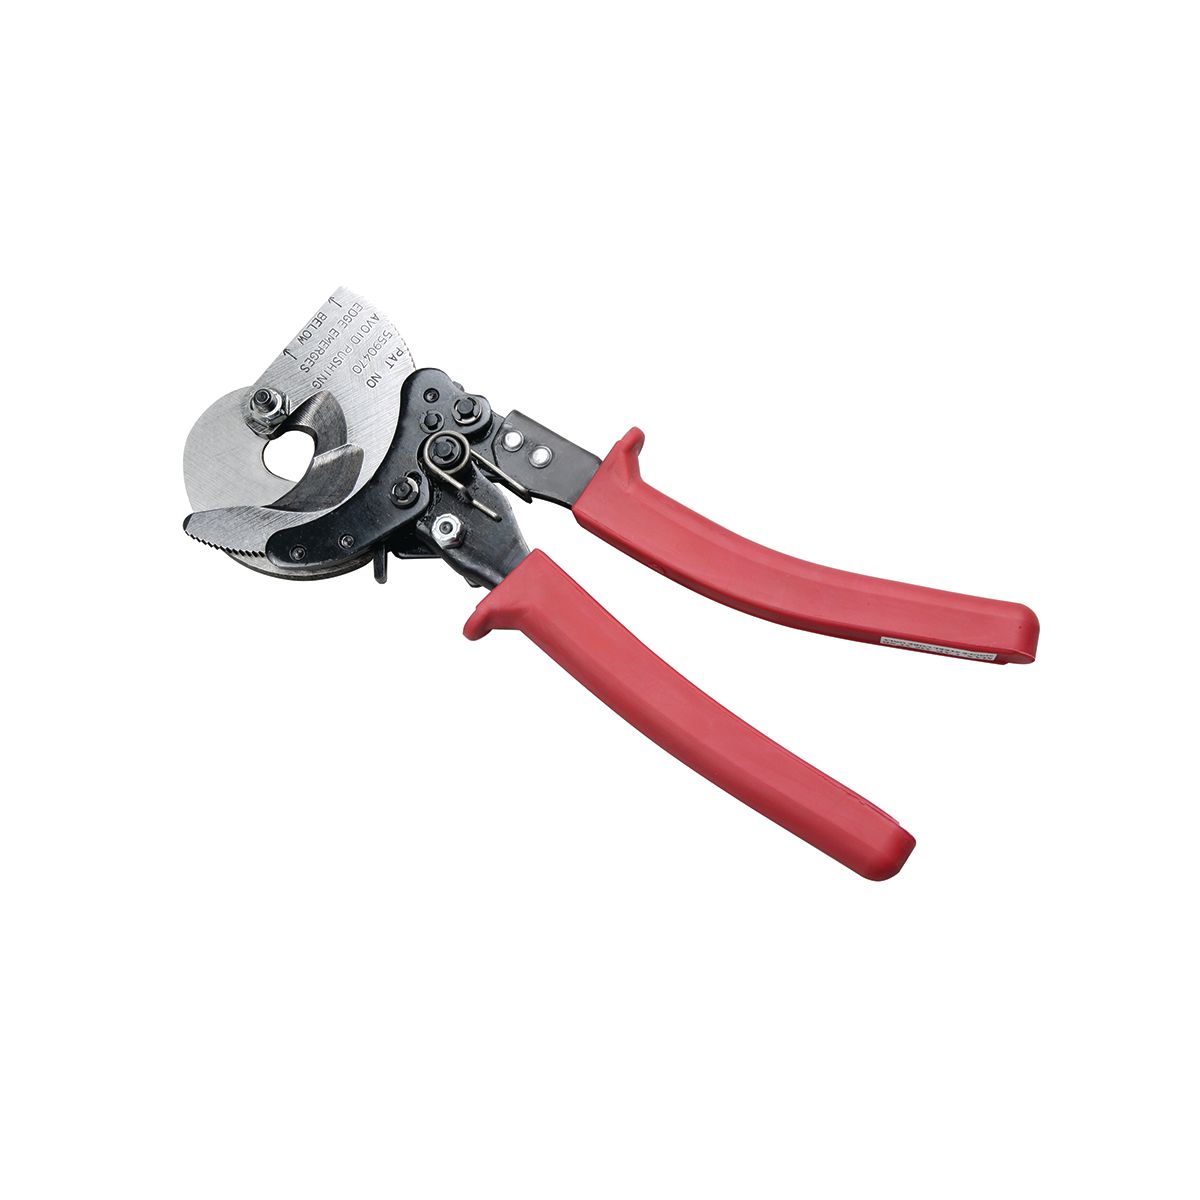 Burndy Y1MRTC Hytool Ratchet Crimper, Copper Hydent Terminals, Splices, and  Thin-Wall C-Taps, 0.73 Width, 9-7/8 Length by